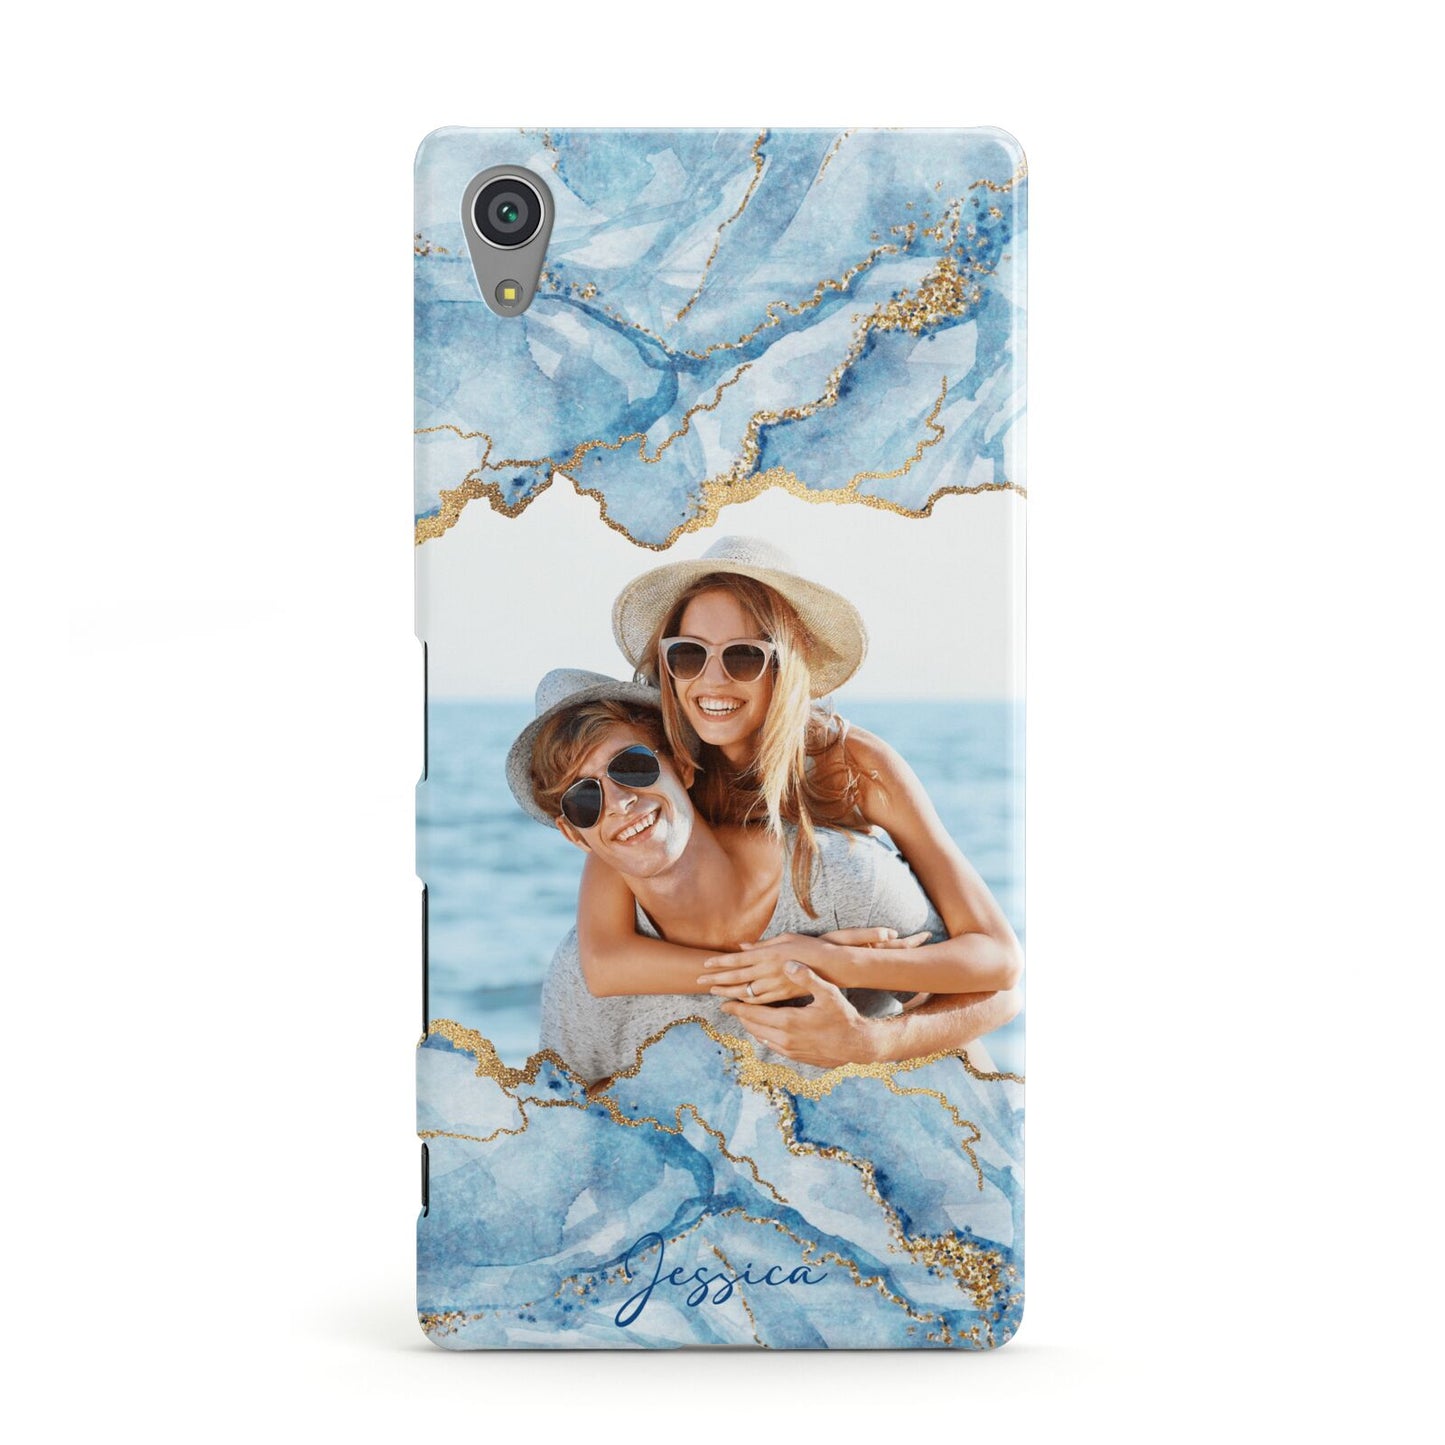 Personalised Photo Marble Sony Xperia Case